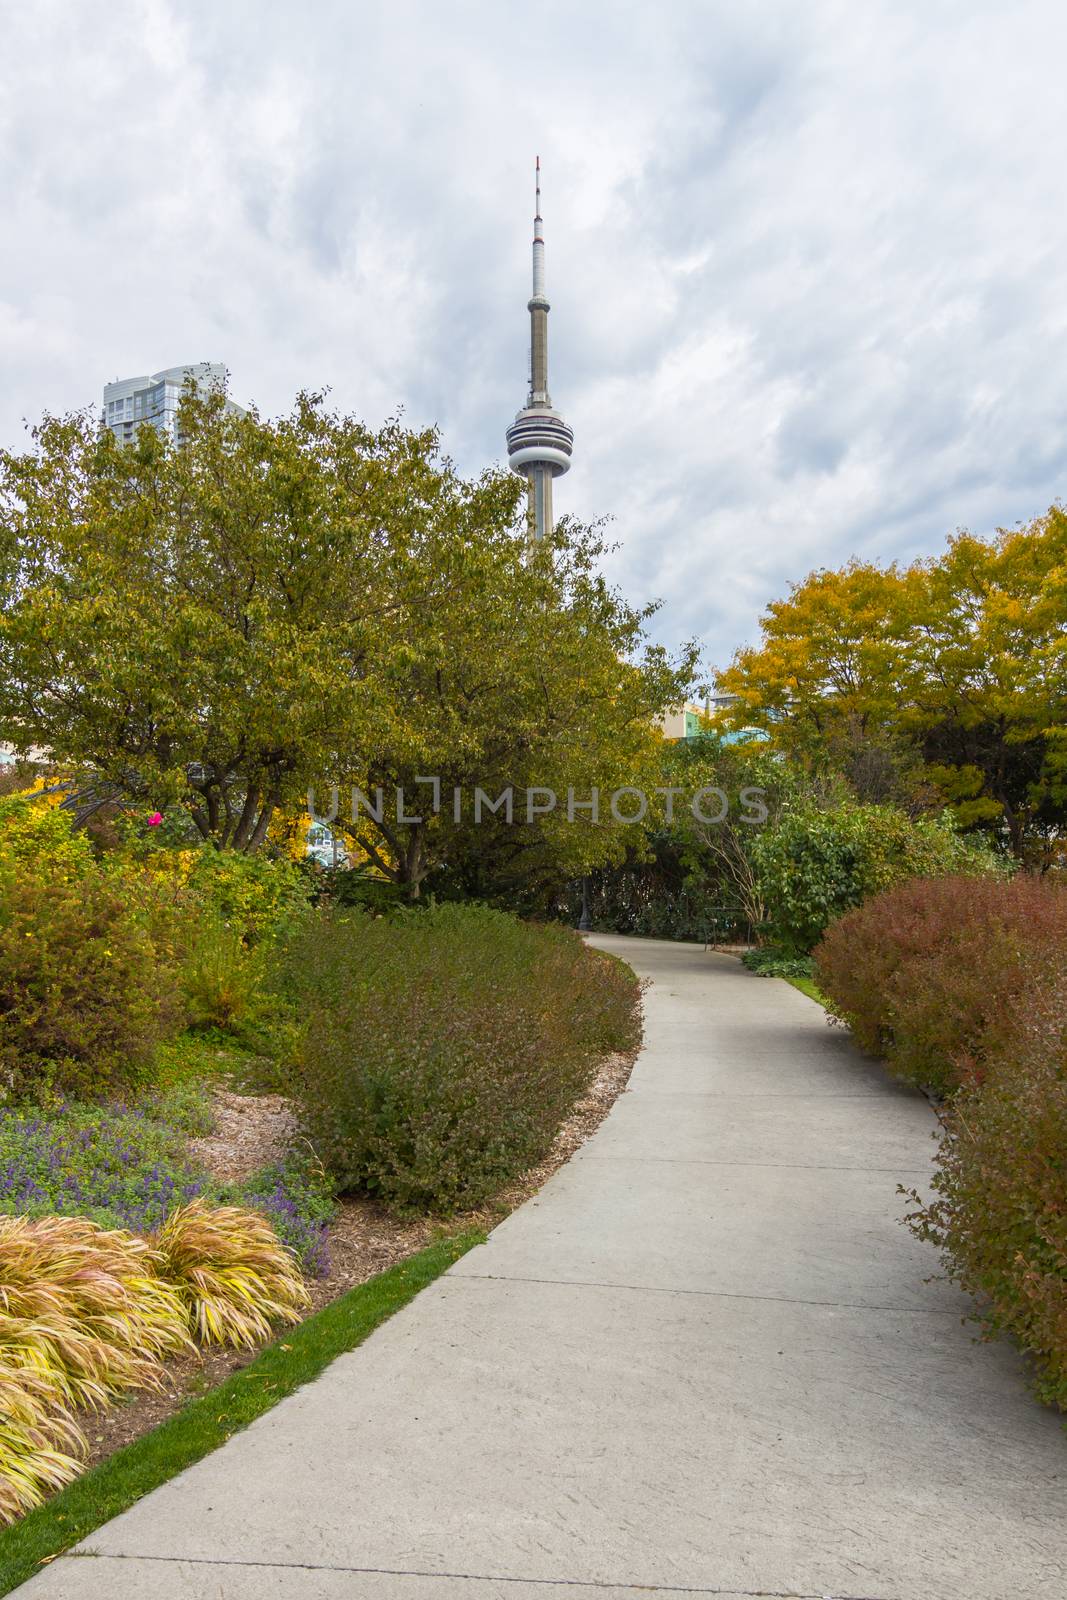 This photo was shot from snake island which is opposite to Toronto city. The leaves of trees change color.